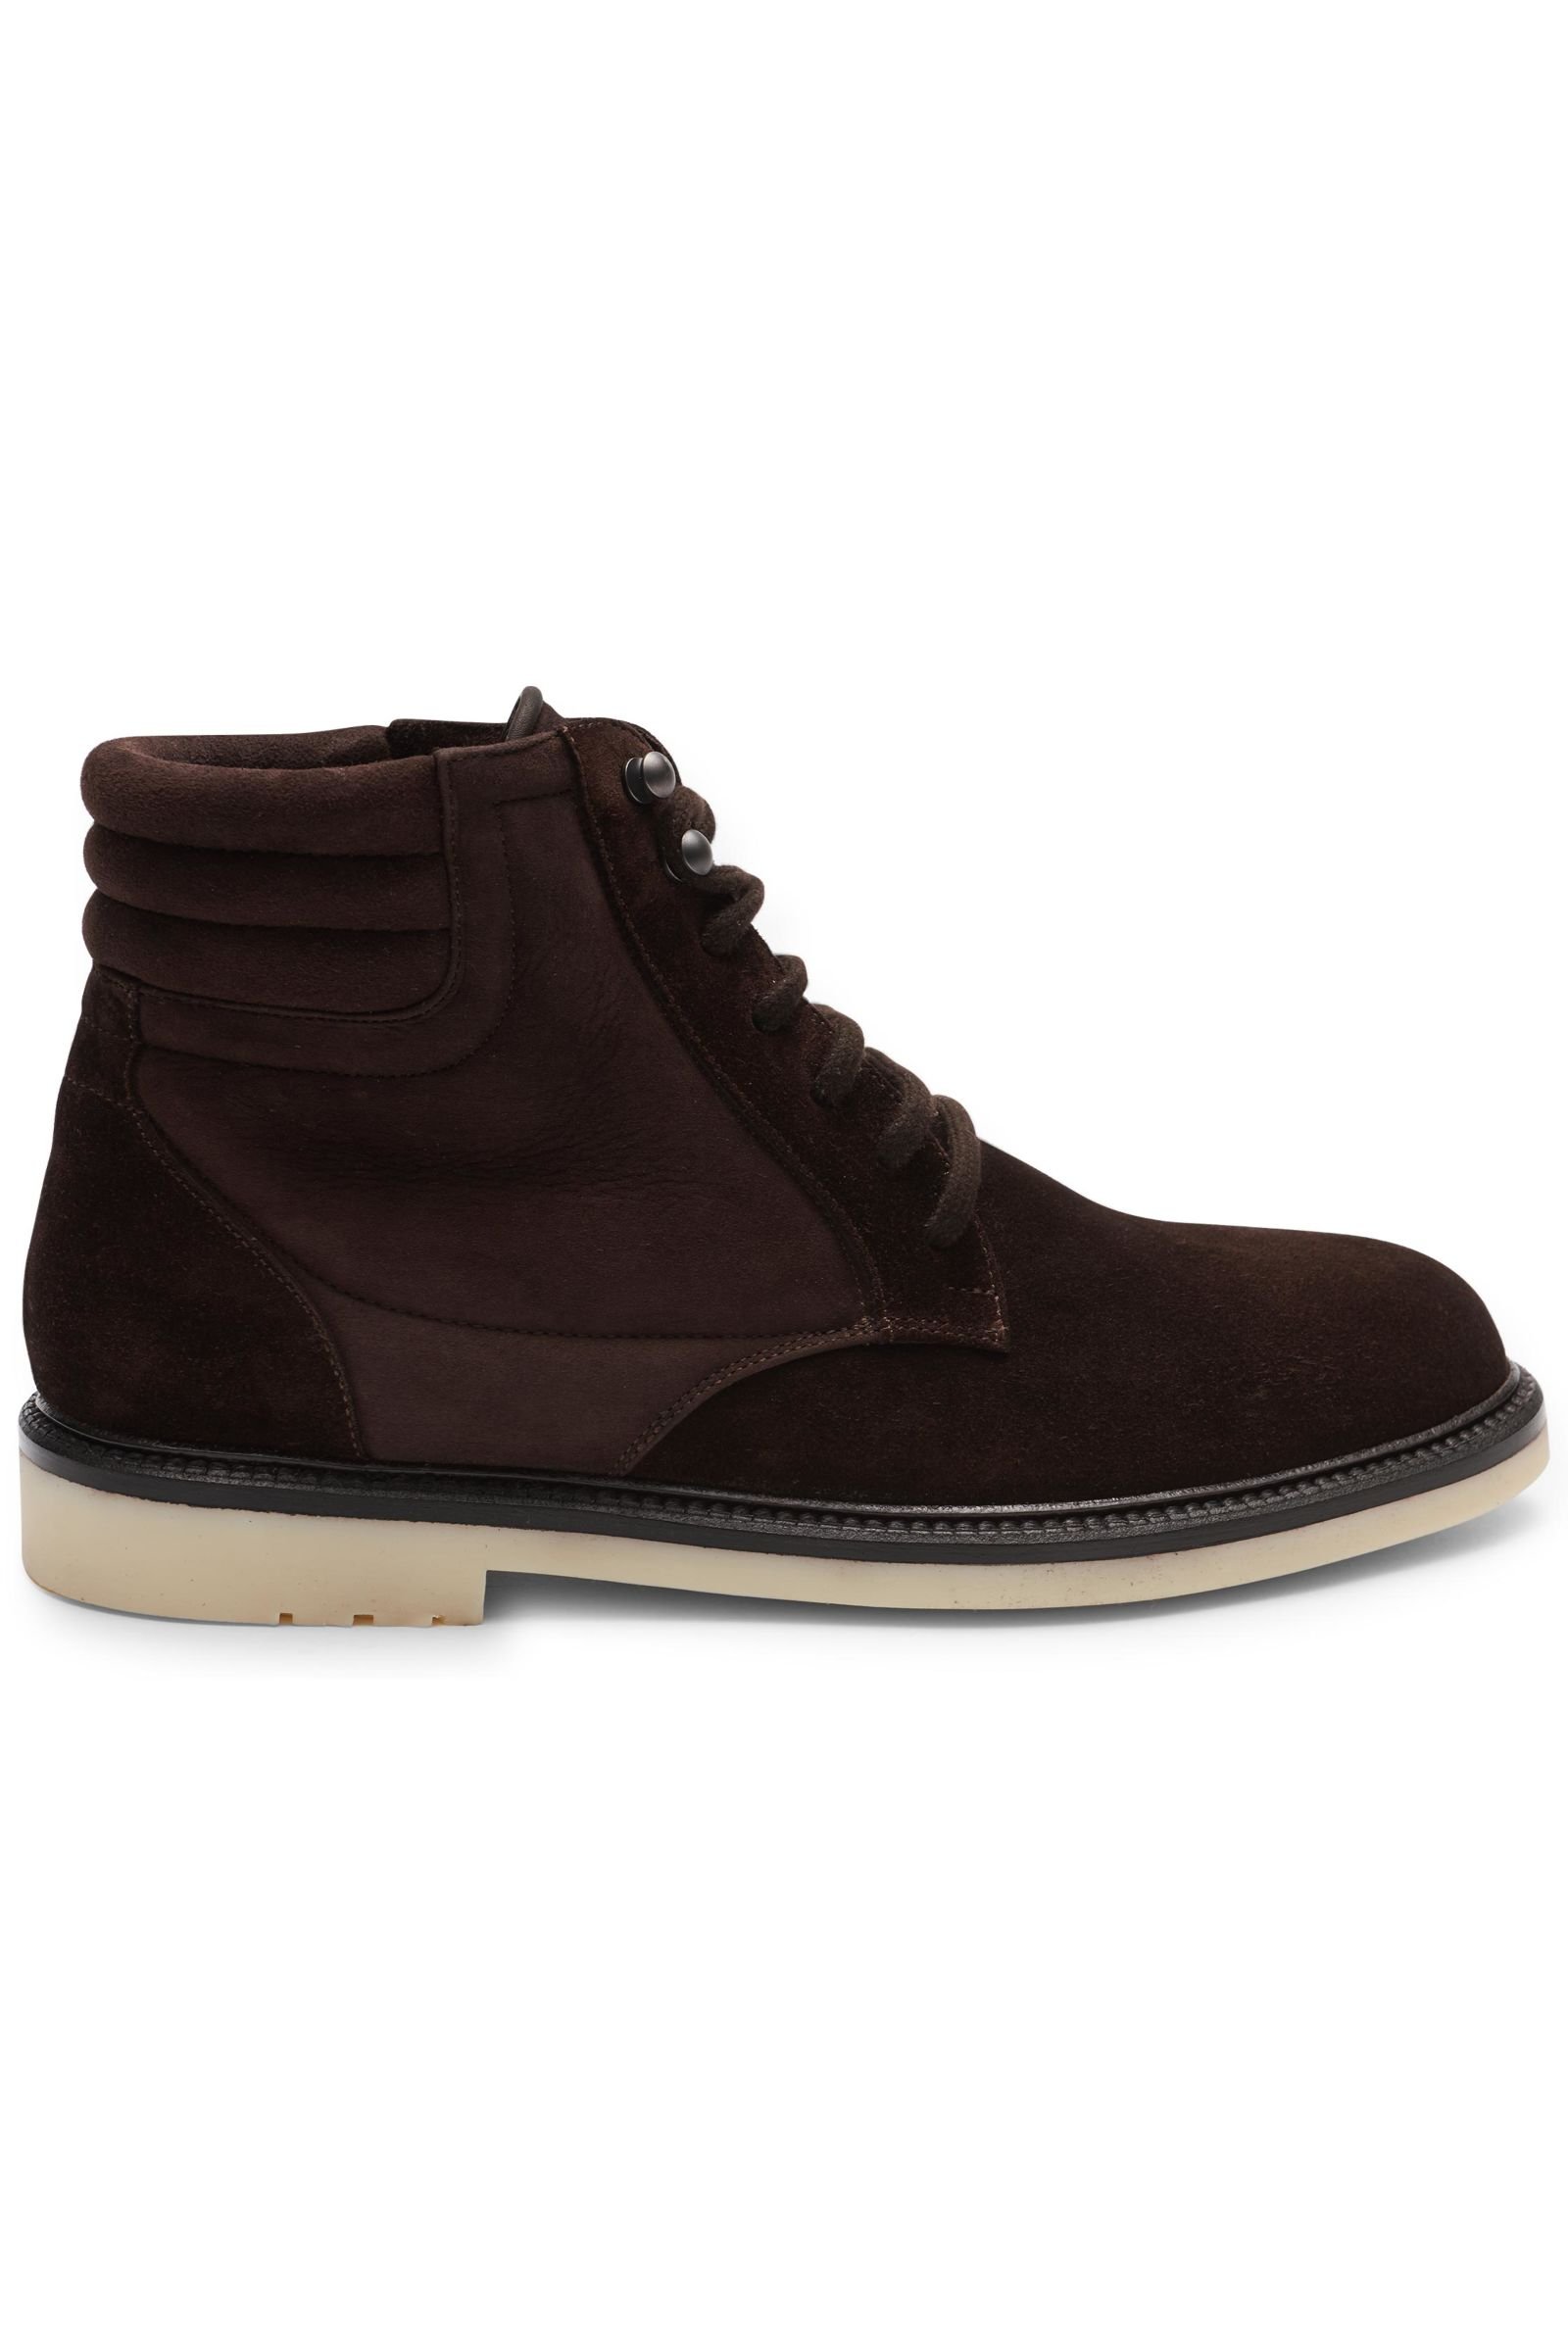 Lace-up boots 'Icer Walk Shearling' dark brown